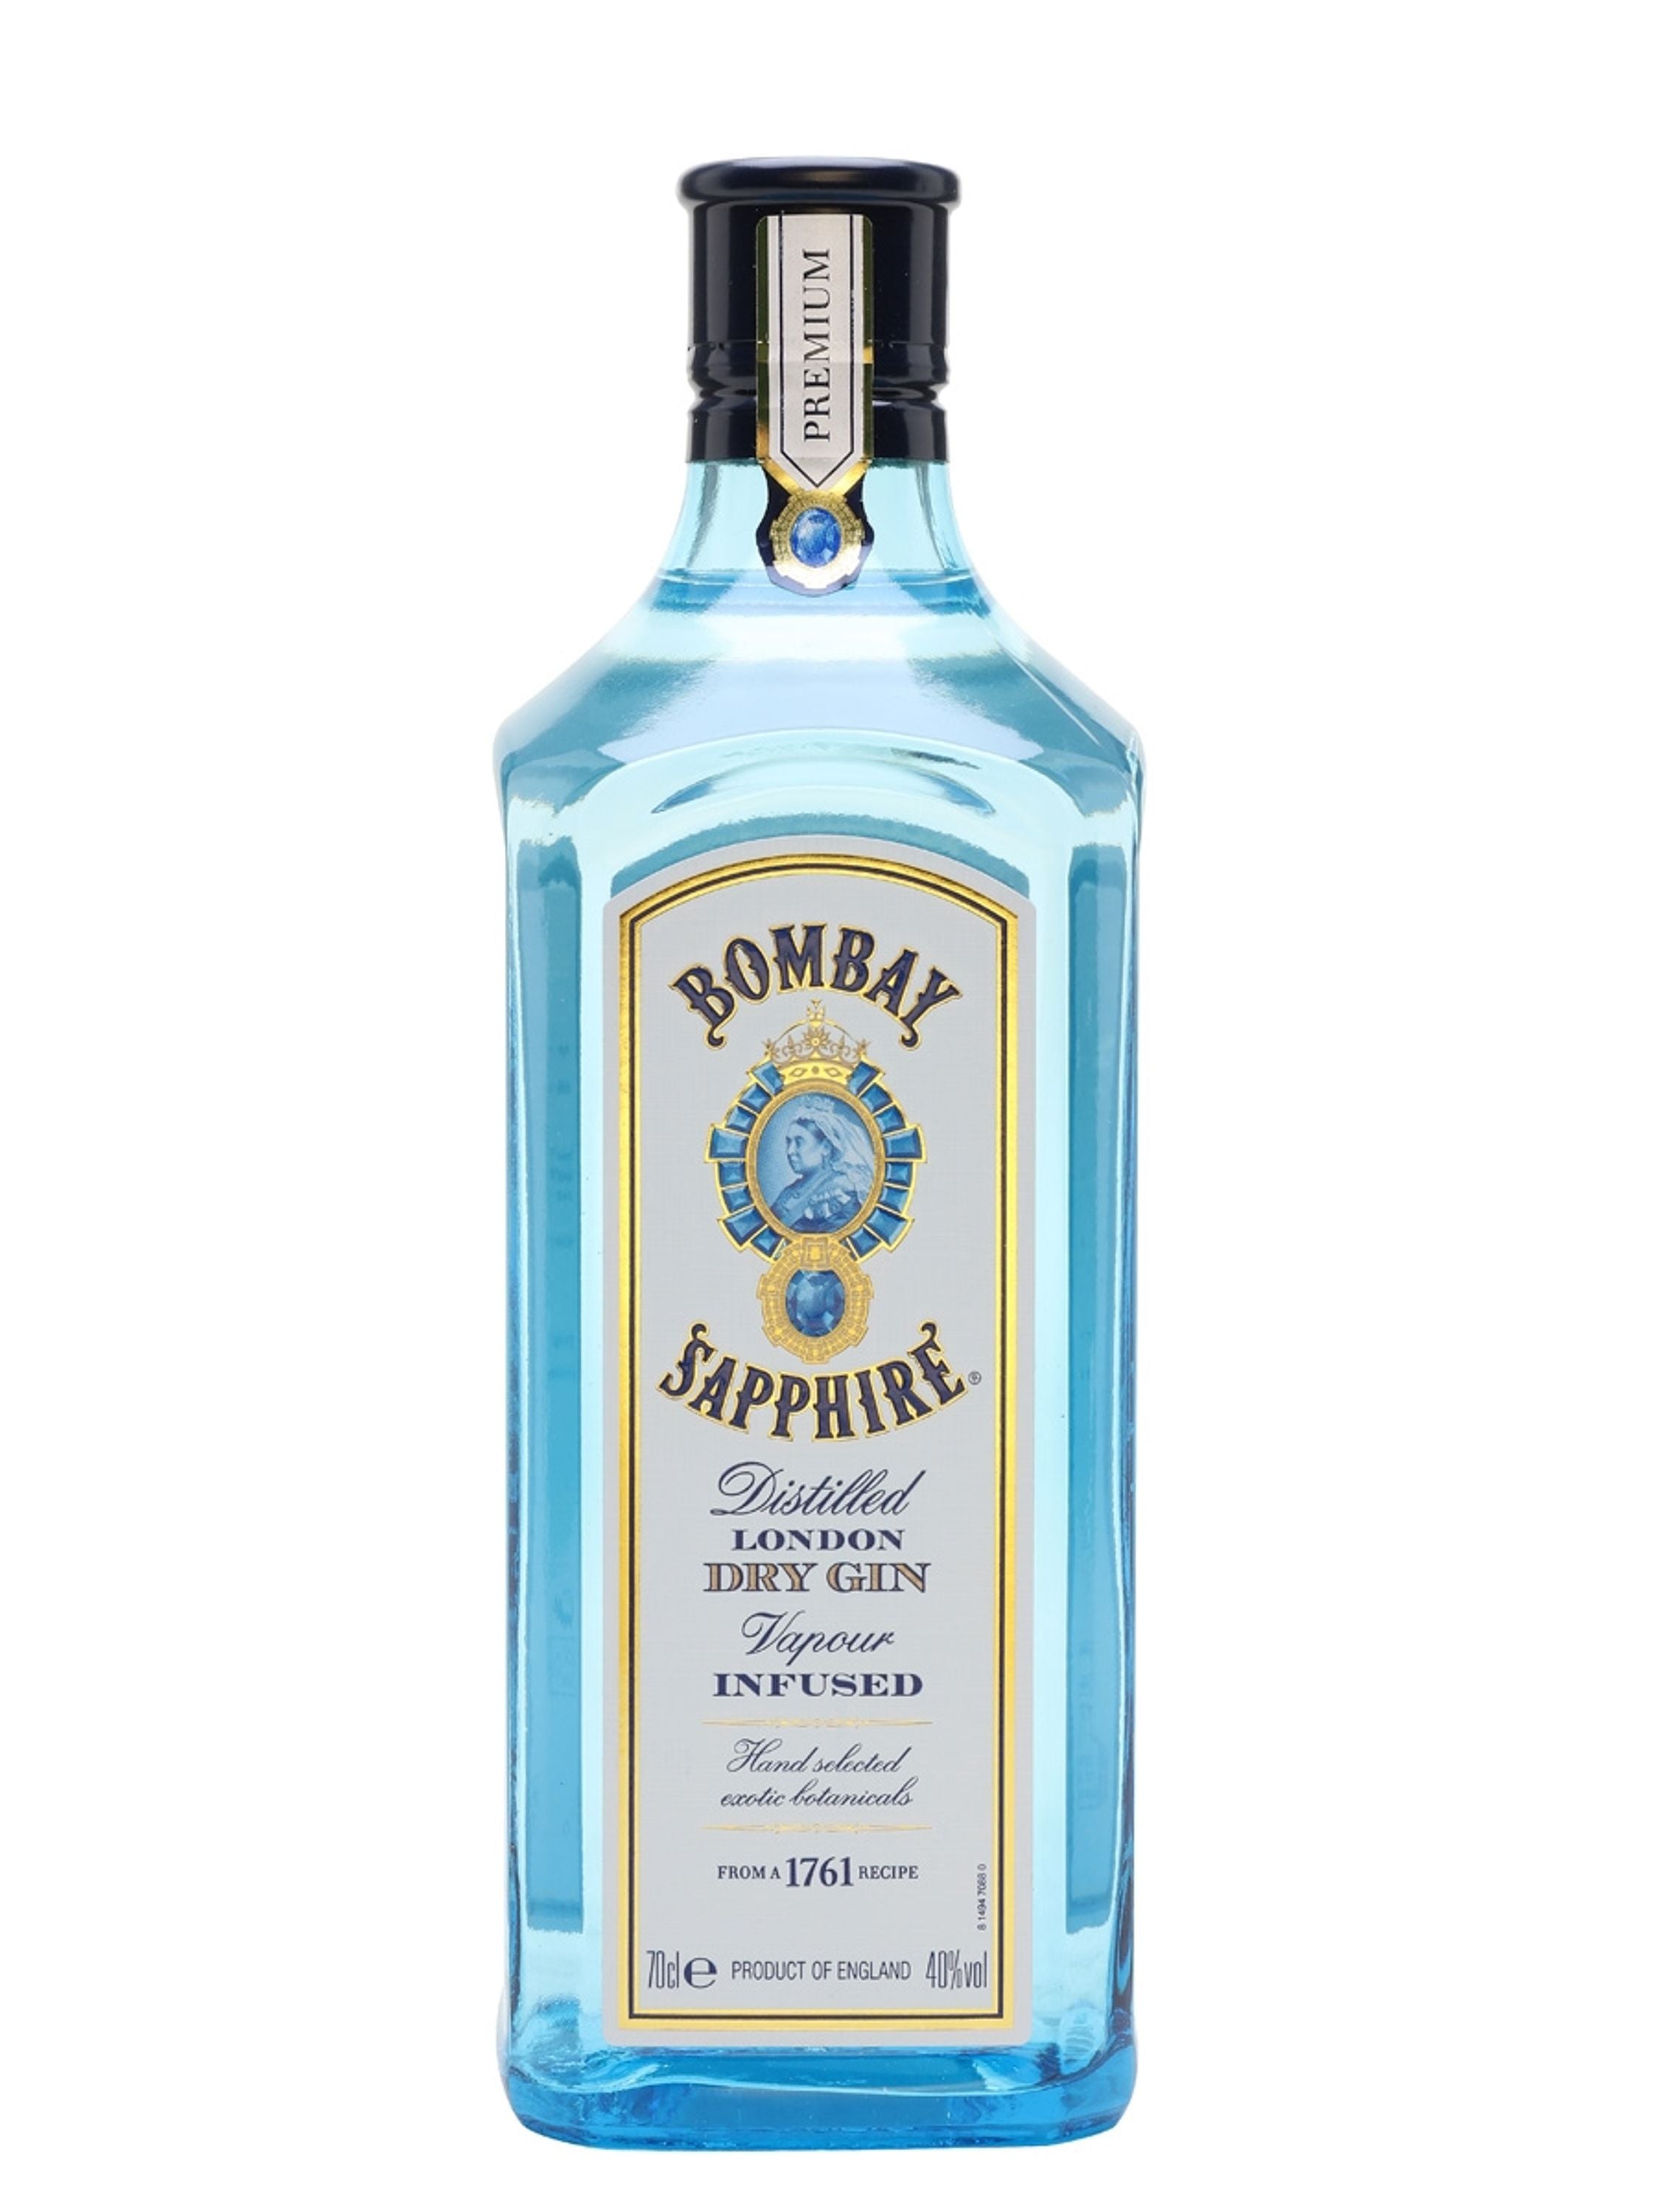 Bombay Sapphire London Dry Gin 0.7l, alc. 40% by volume